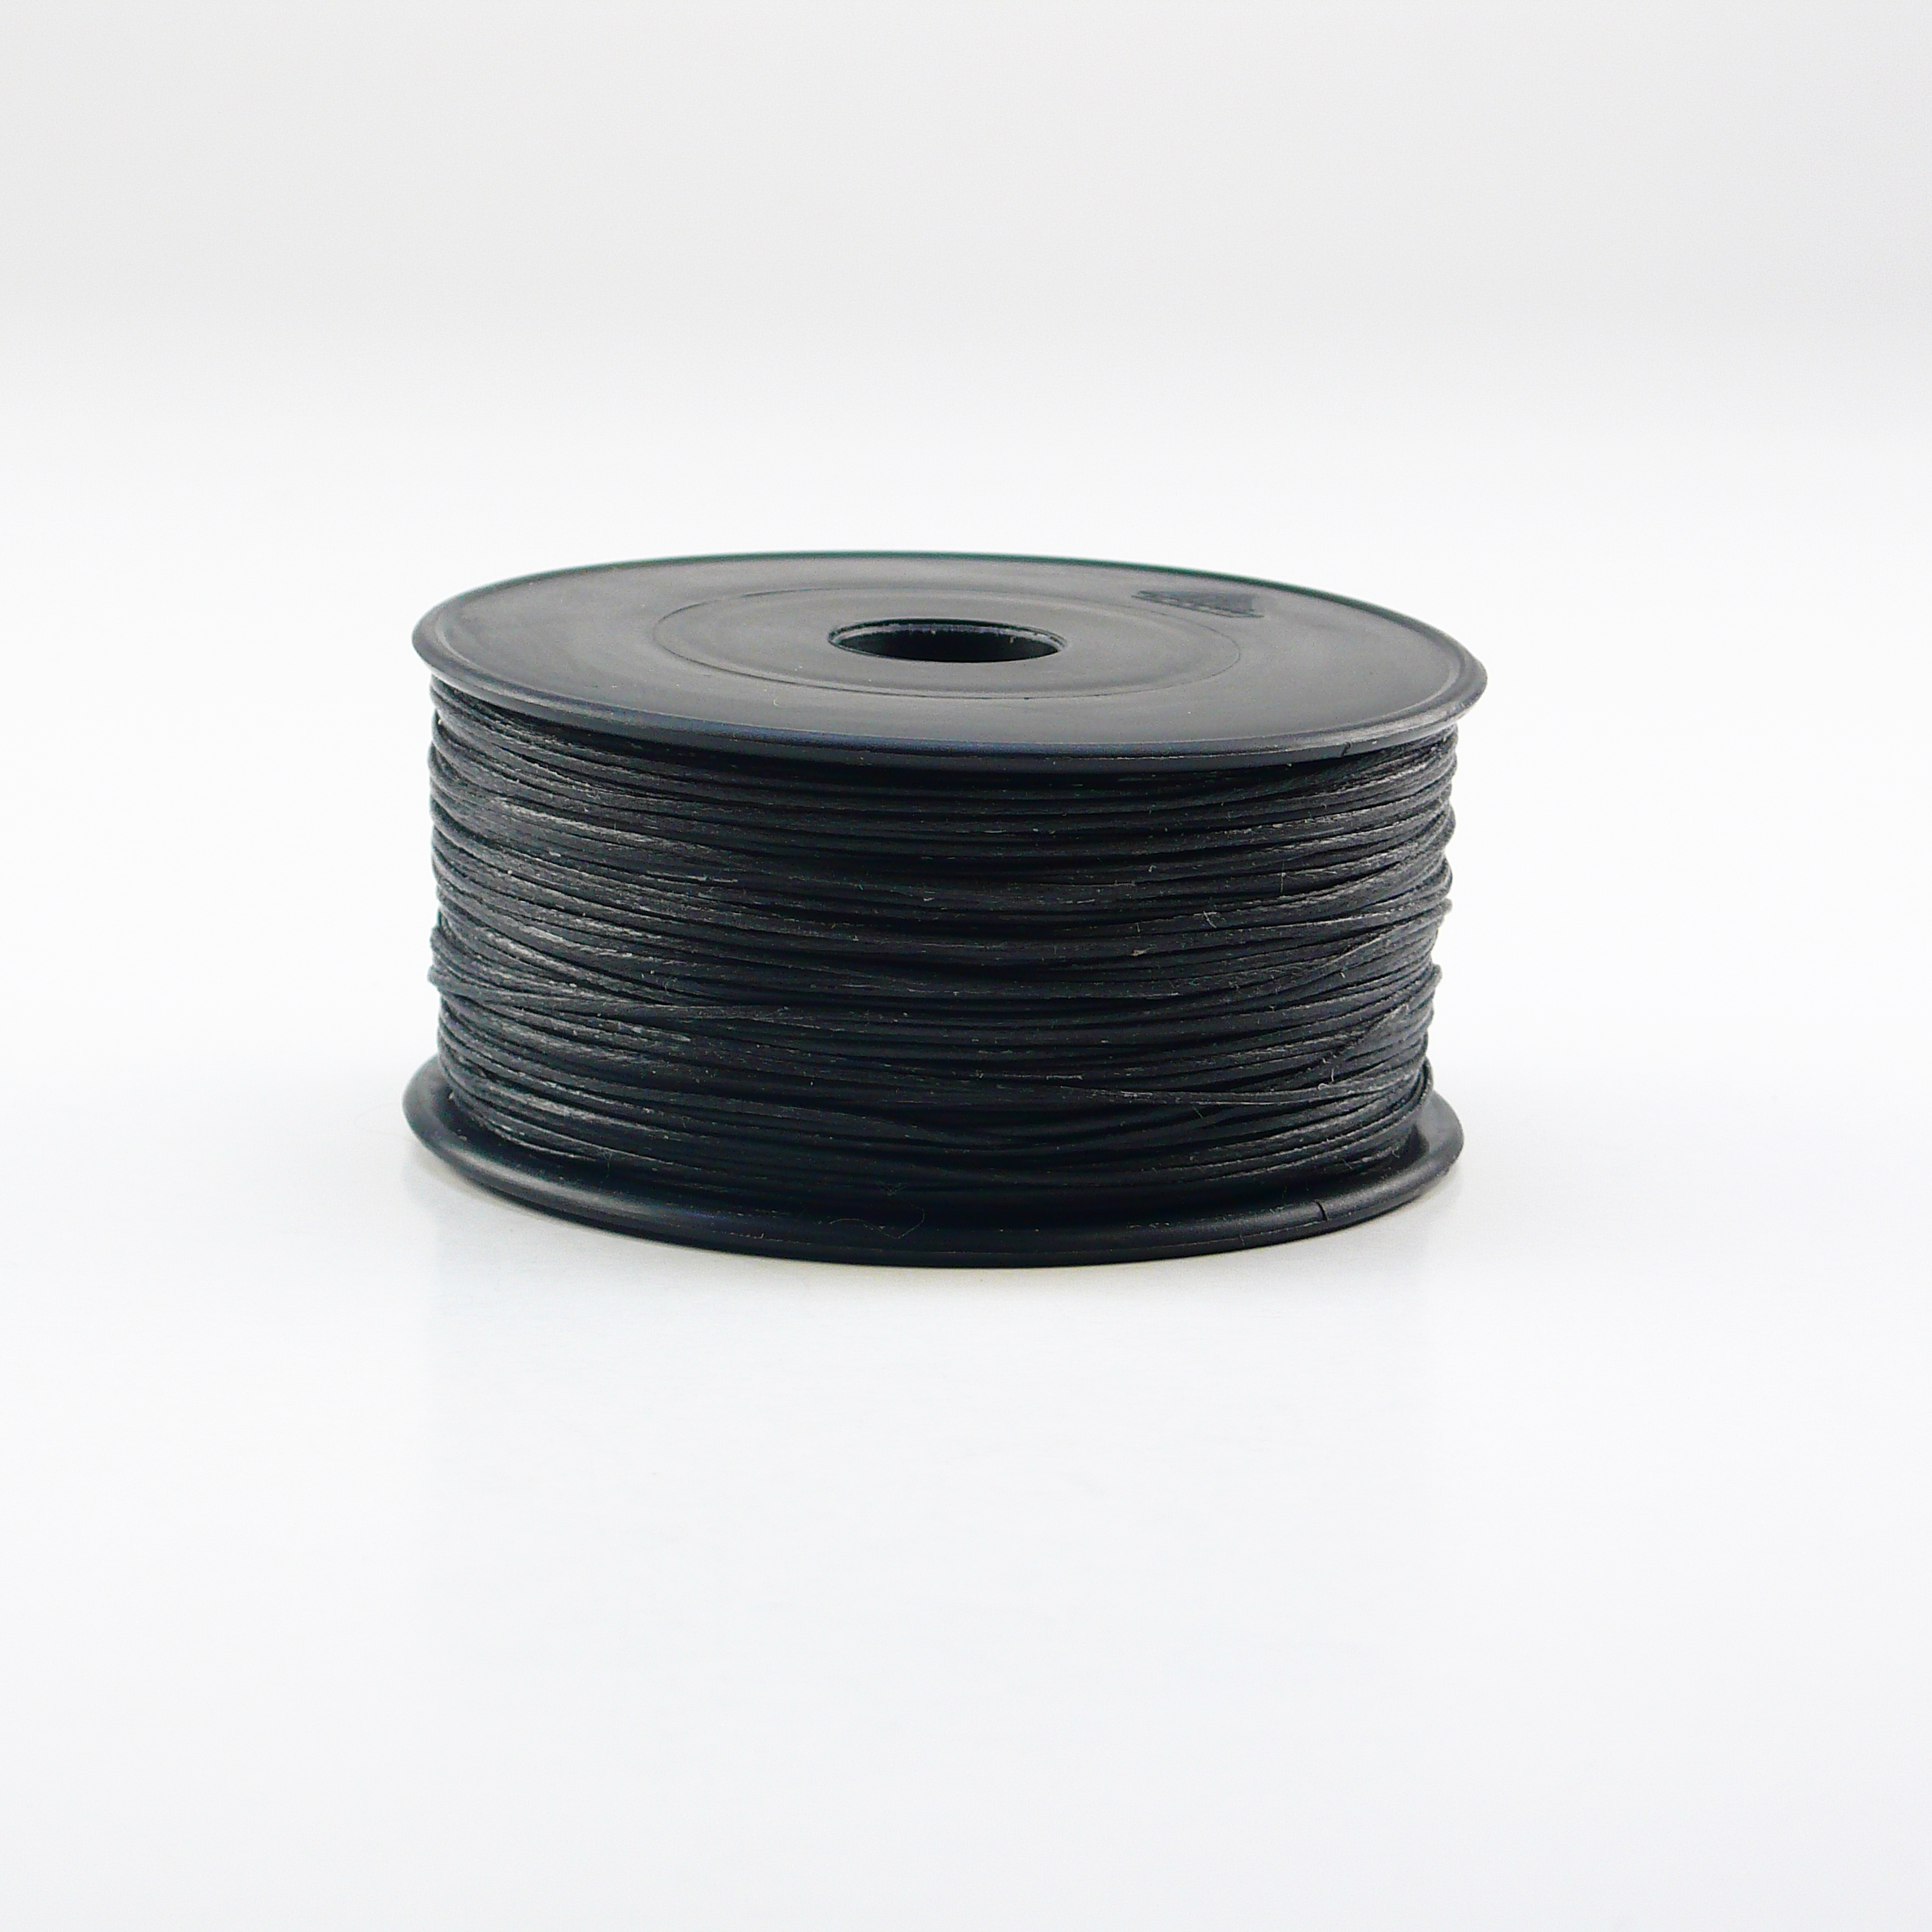 Hand sewing braided and waxed Nylon thread Neverstrand MADE IN SWITZERLAND, Nr. 5 spool à 50 g, 130 m appprox, Black